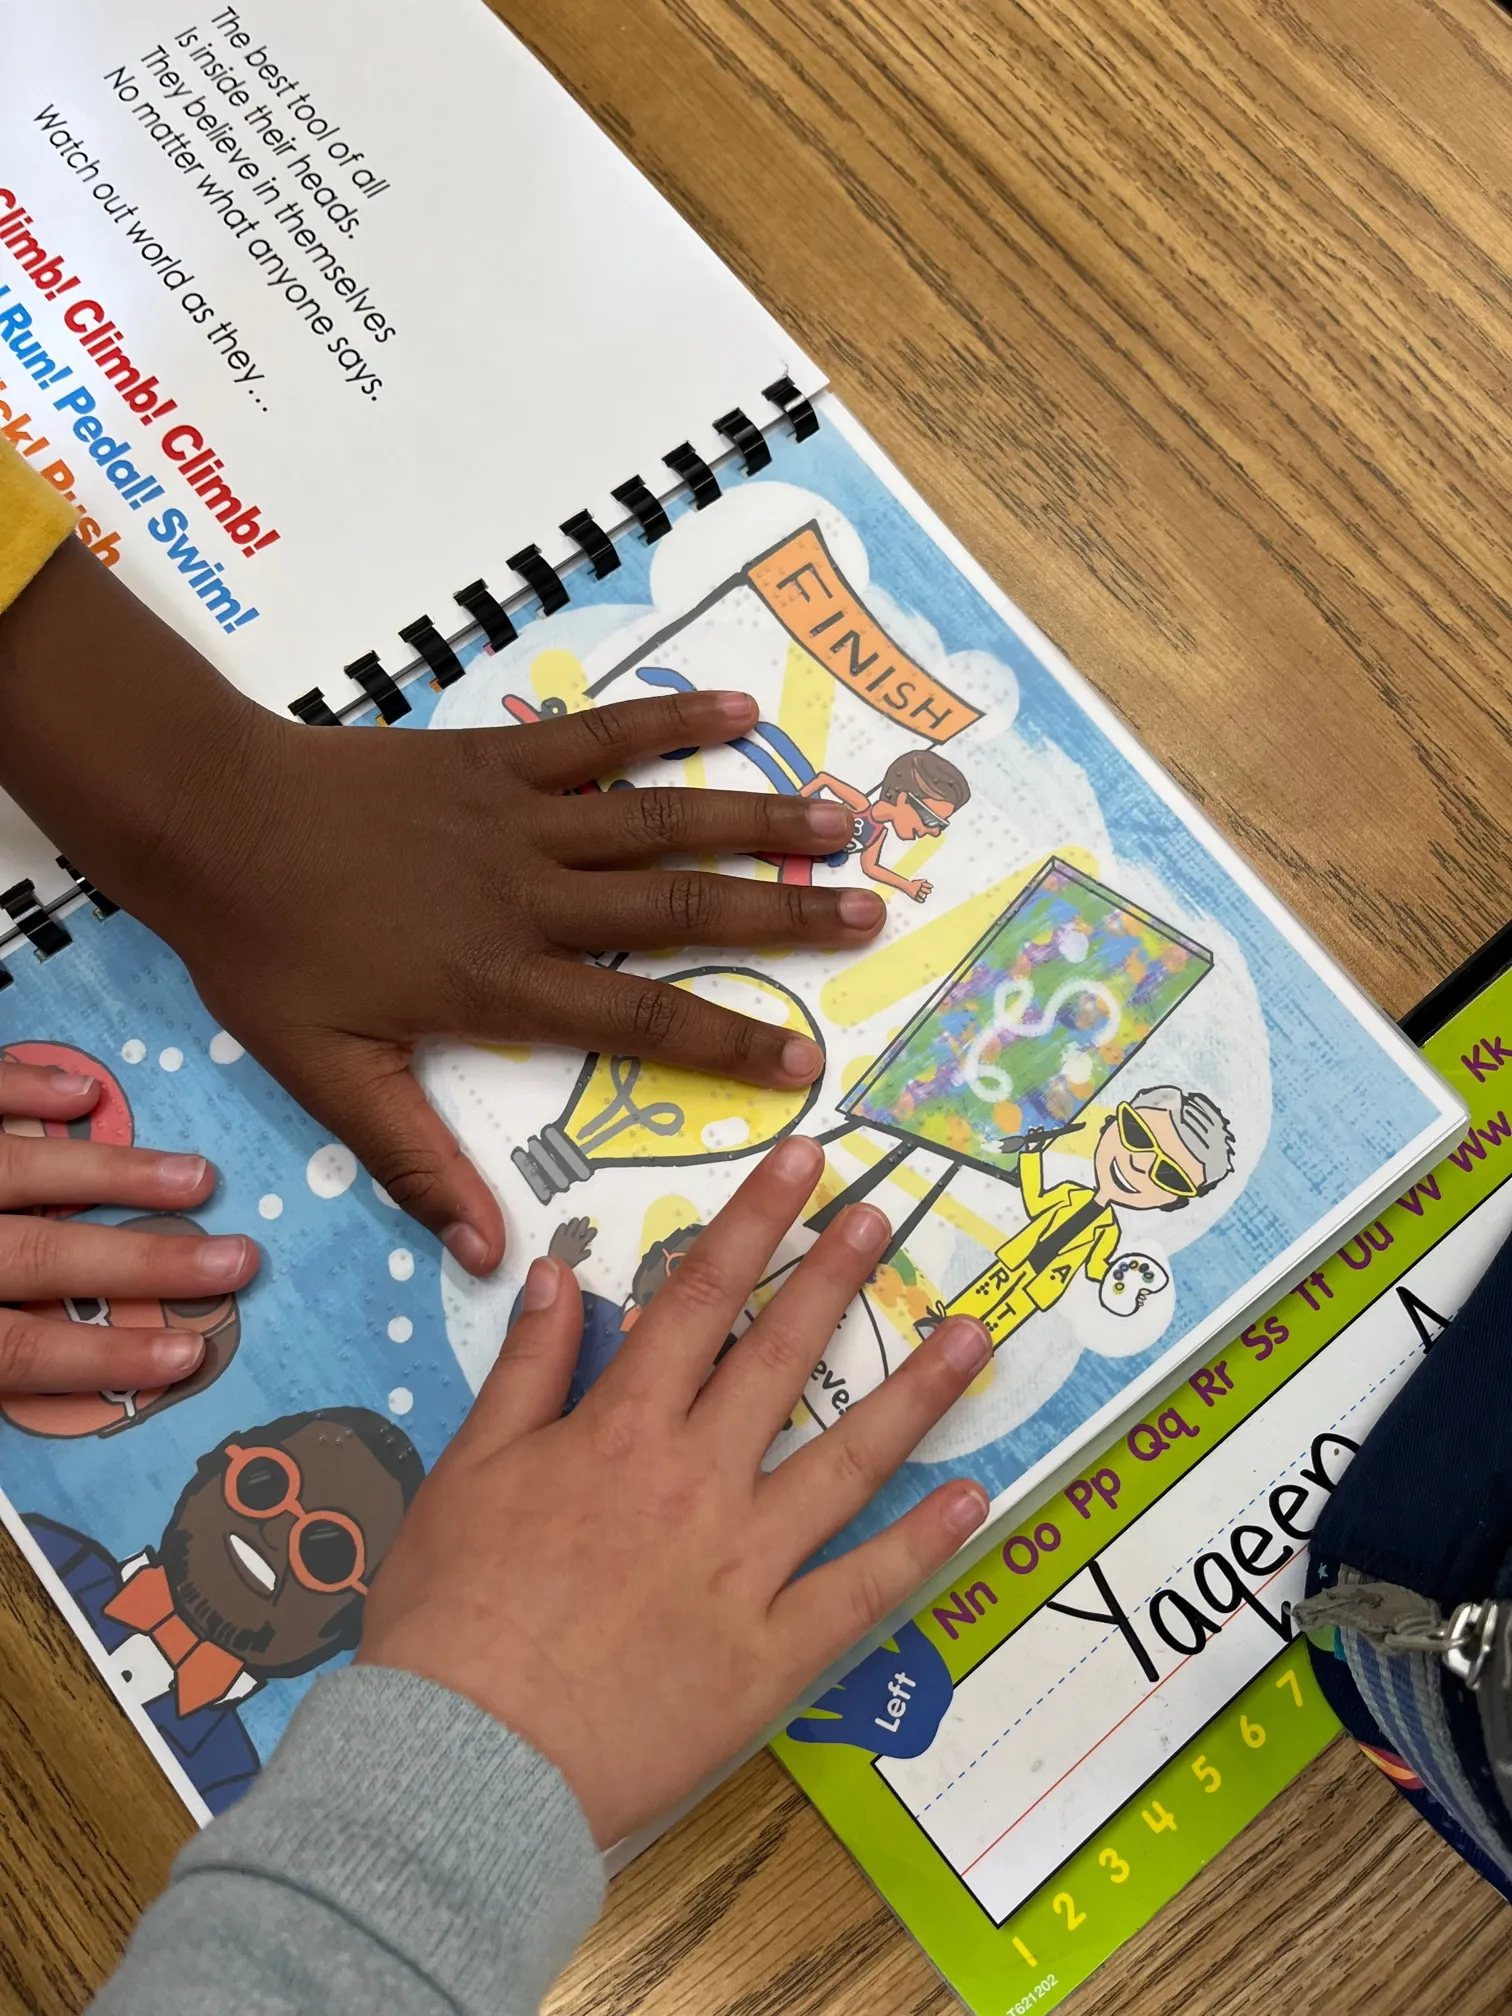 young children's hands on the braille in the book